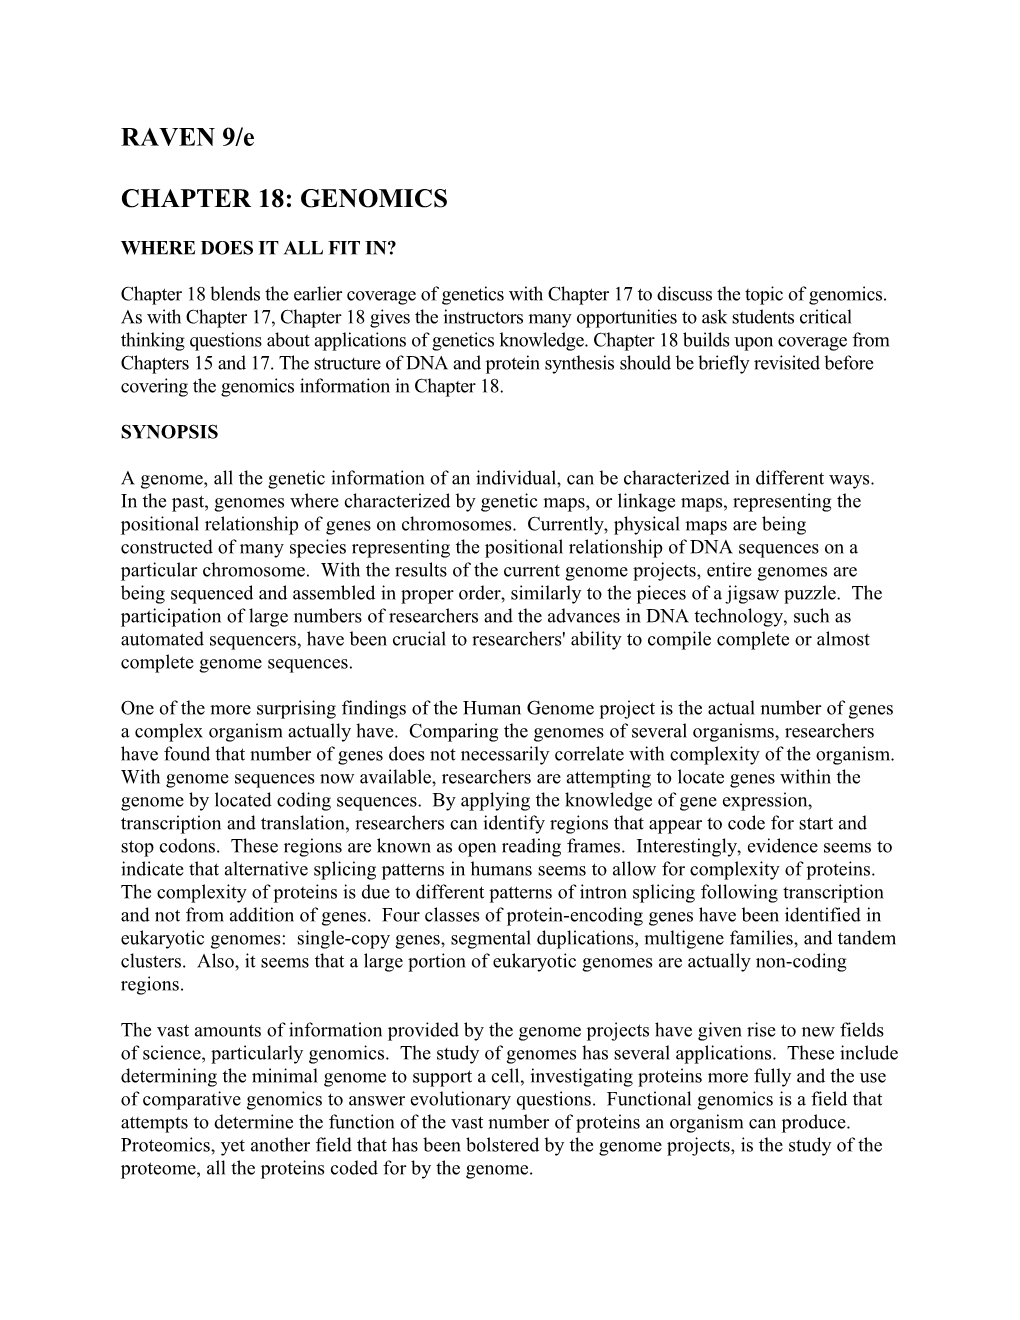 Genomes Chapter Synopsis